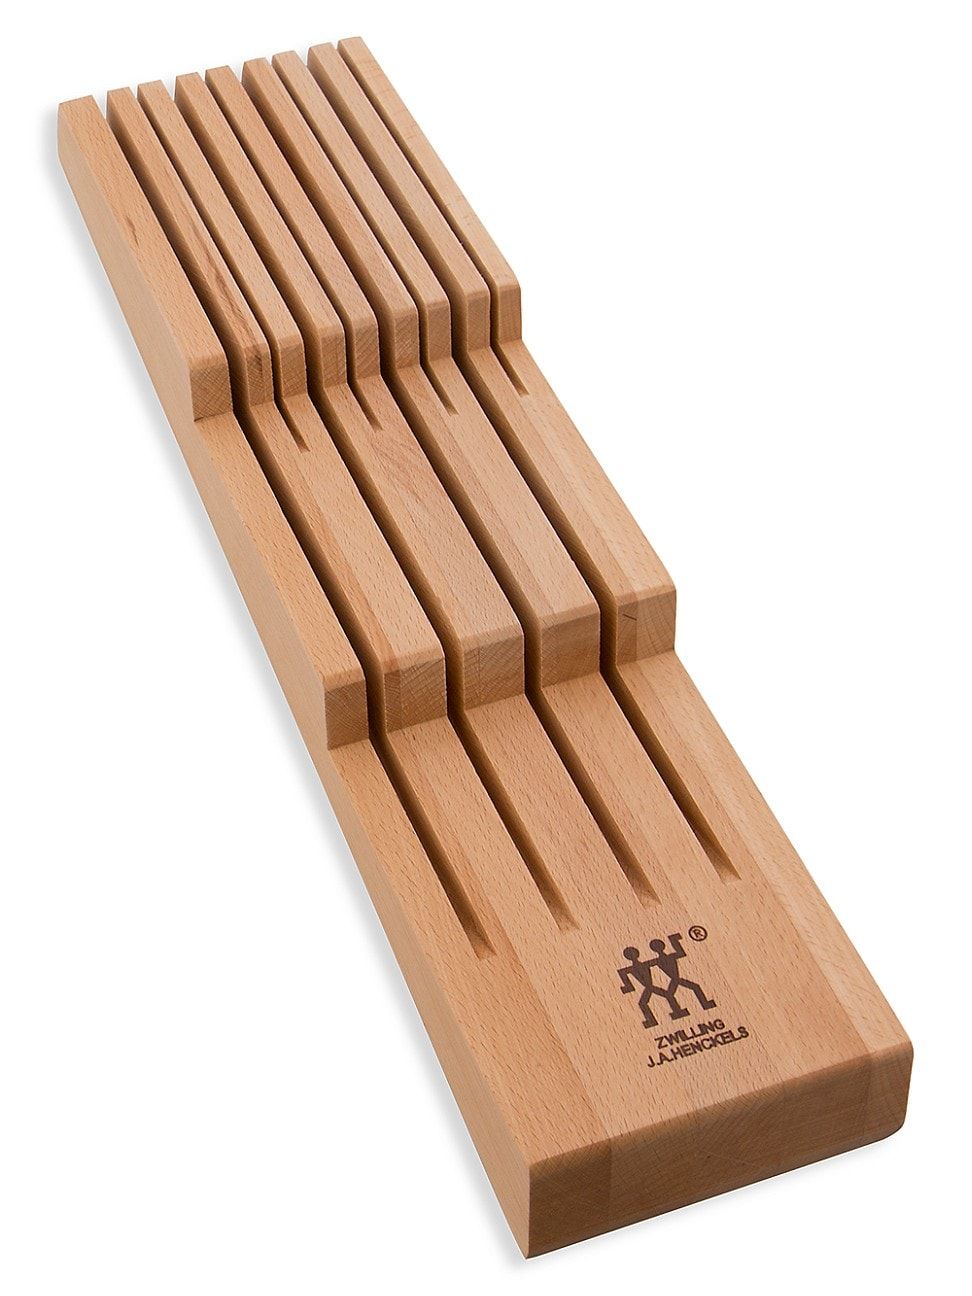 In-Drawer Knife Organizer - 8 Slot - Bamboo | Saks Fifth Avenue